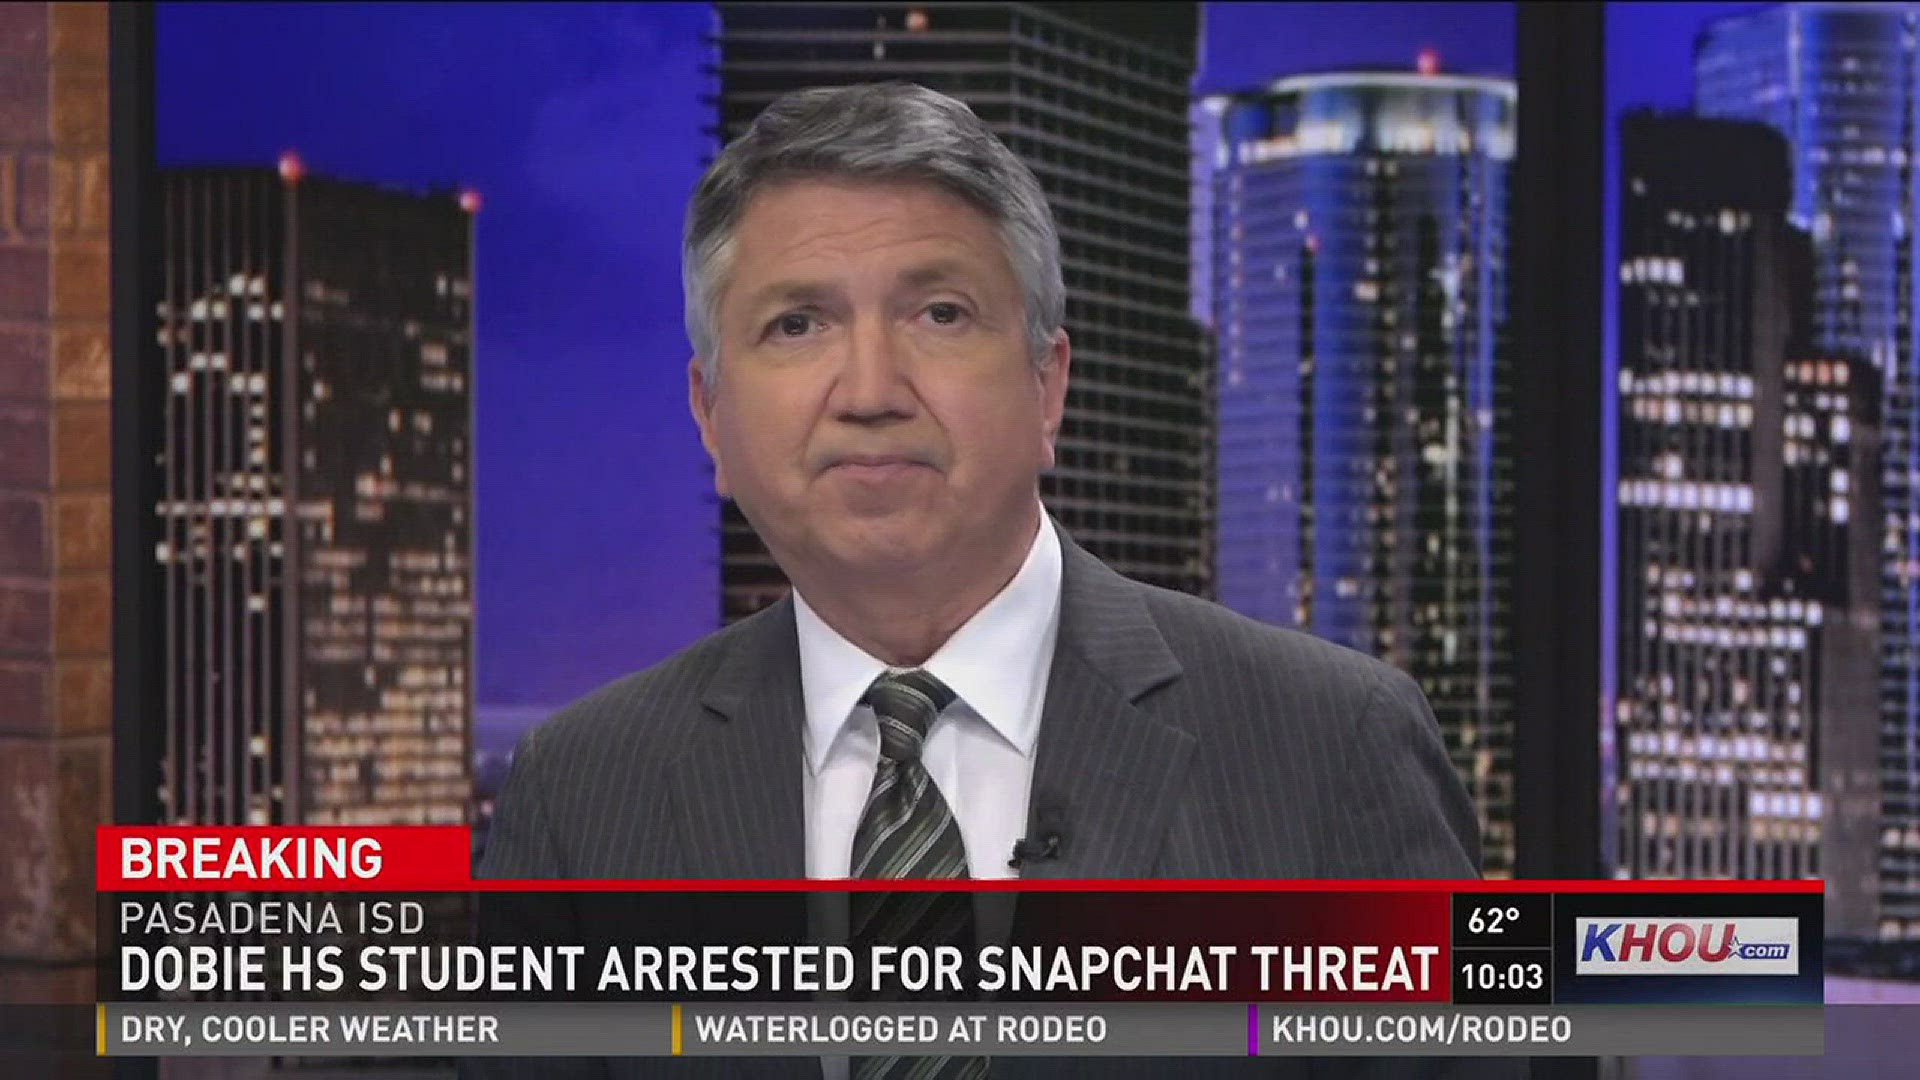 A Dobie High School student has been arrested for making a terroristic threat on Snapchat that went viral among students nationwide.